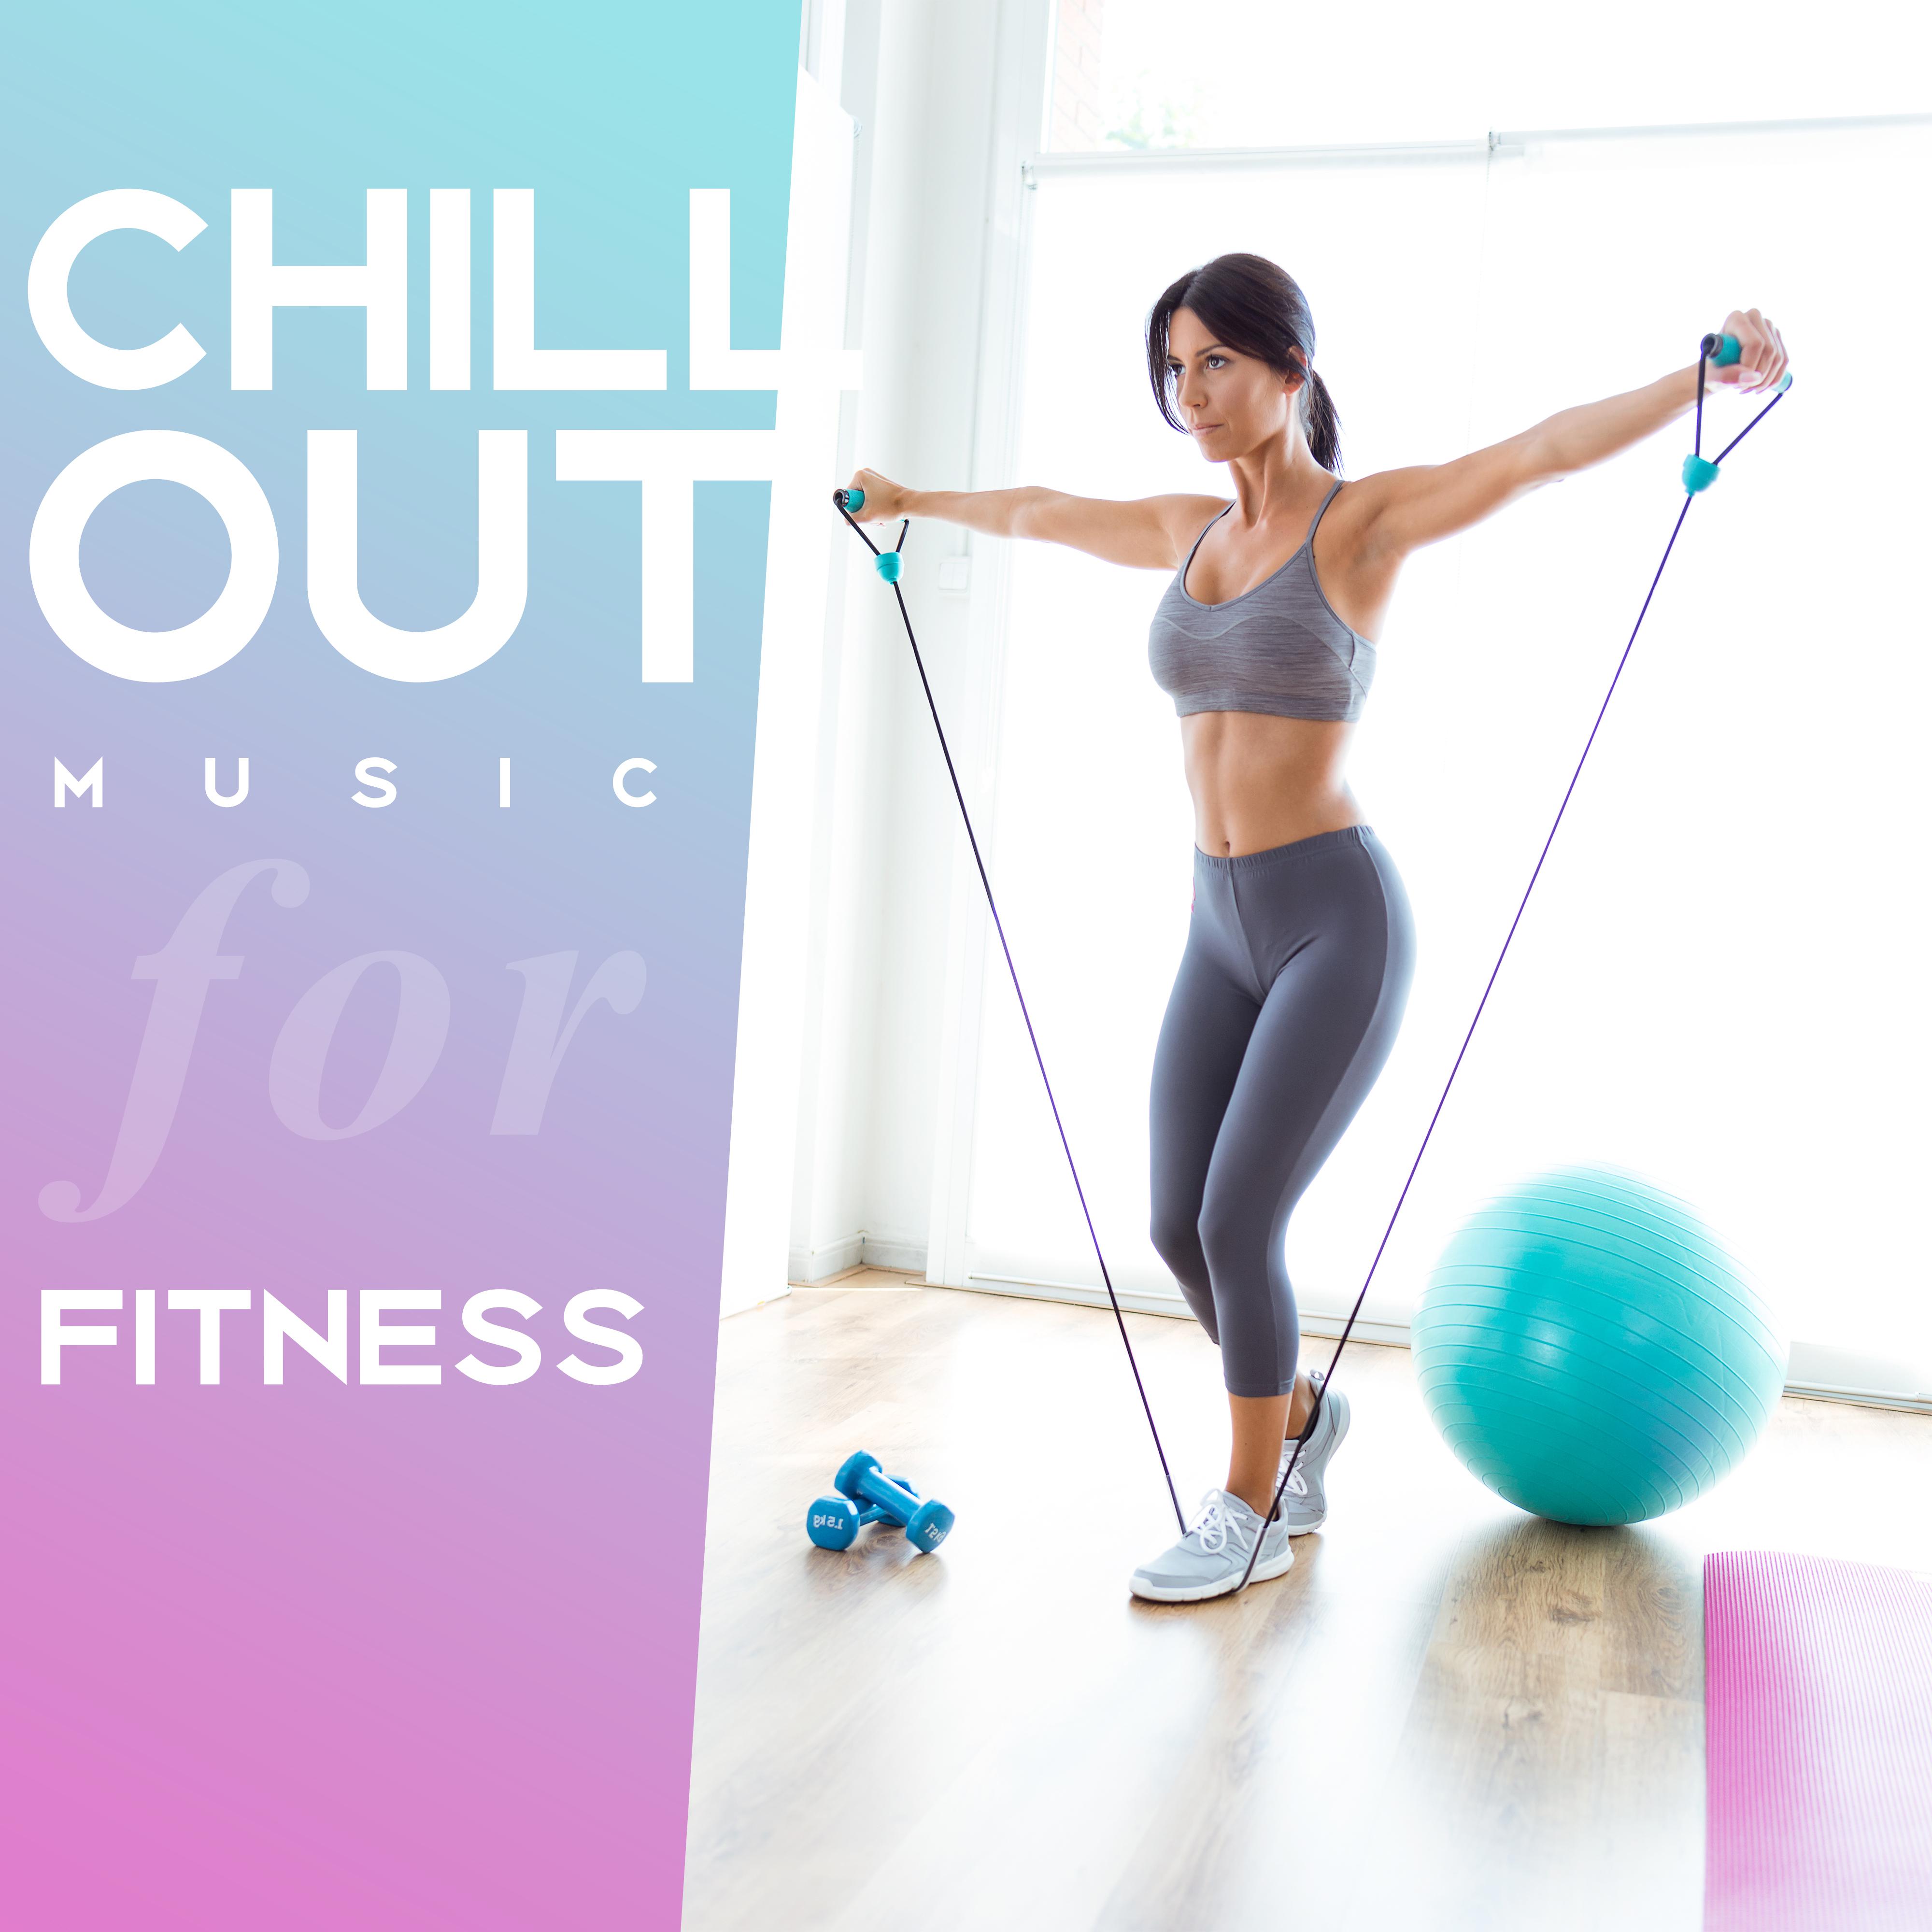 Chillout Music for Fitness